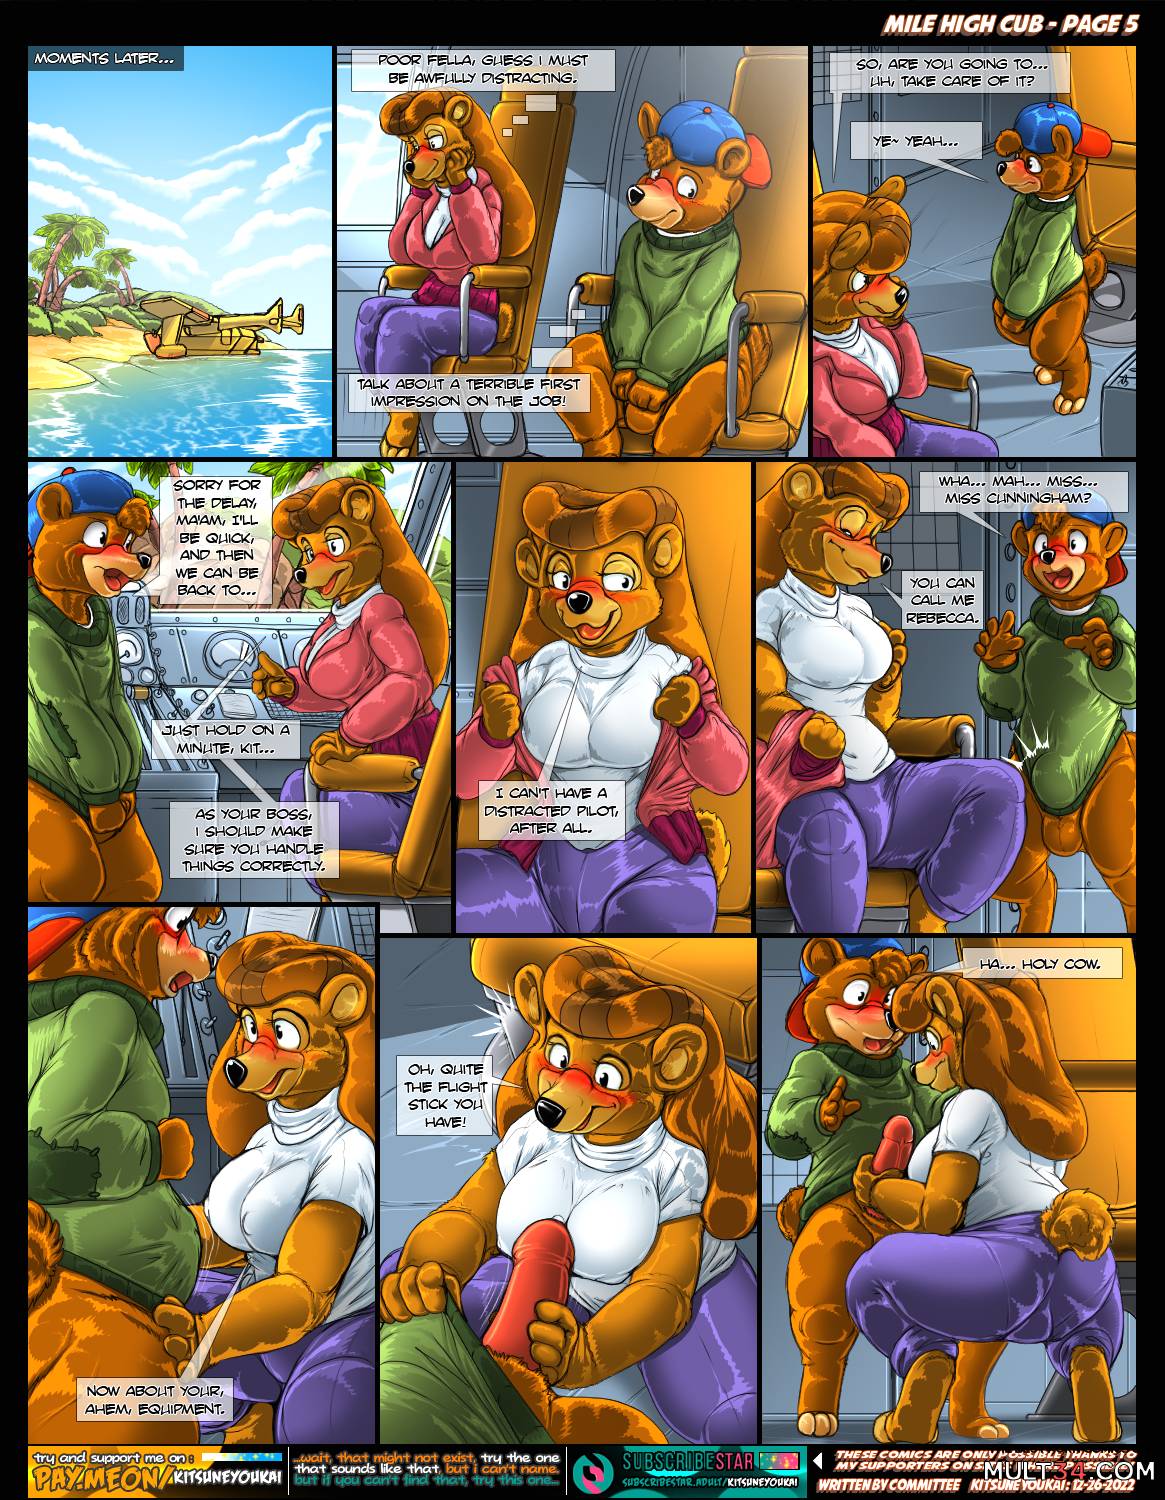 Mile High Club page 5